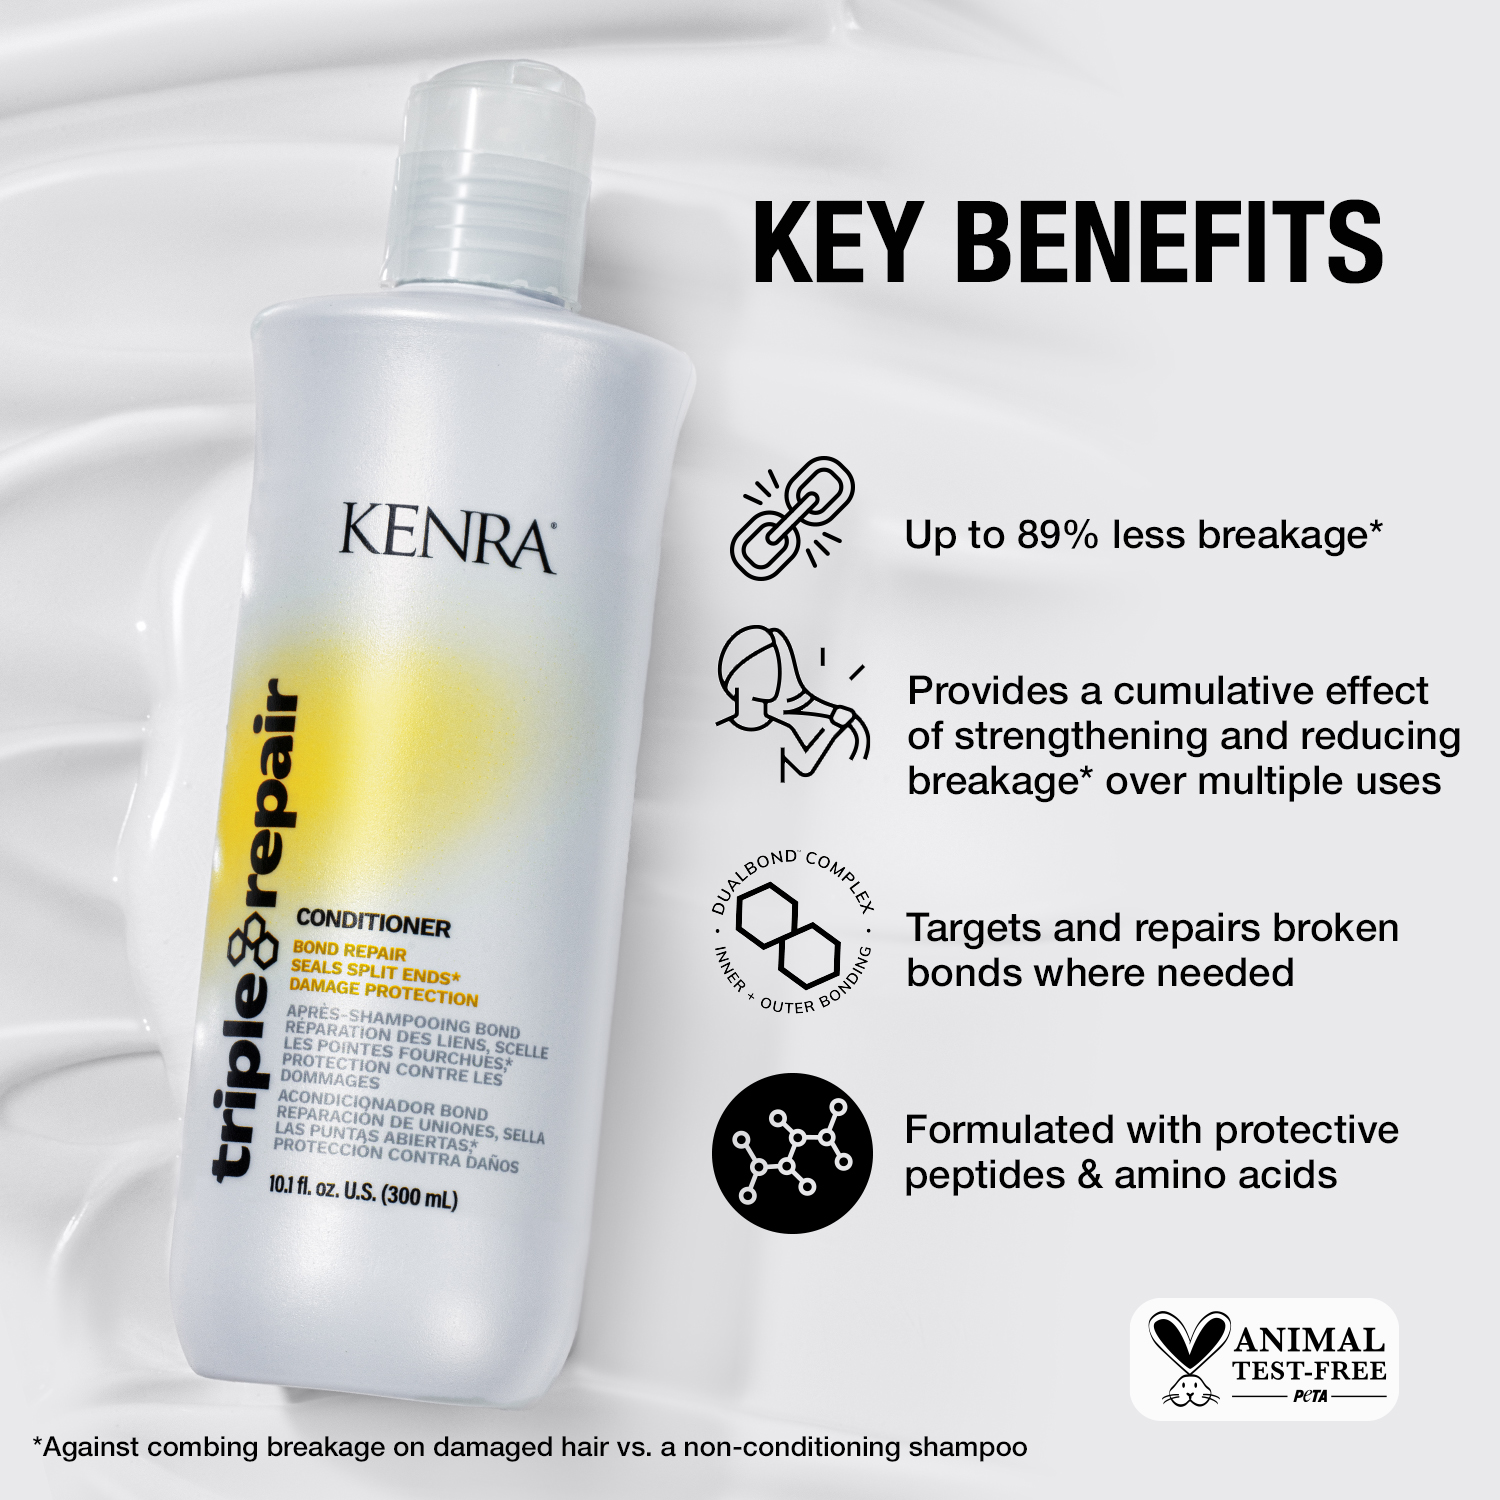 TR Conditioner Kenra Infographic